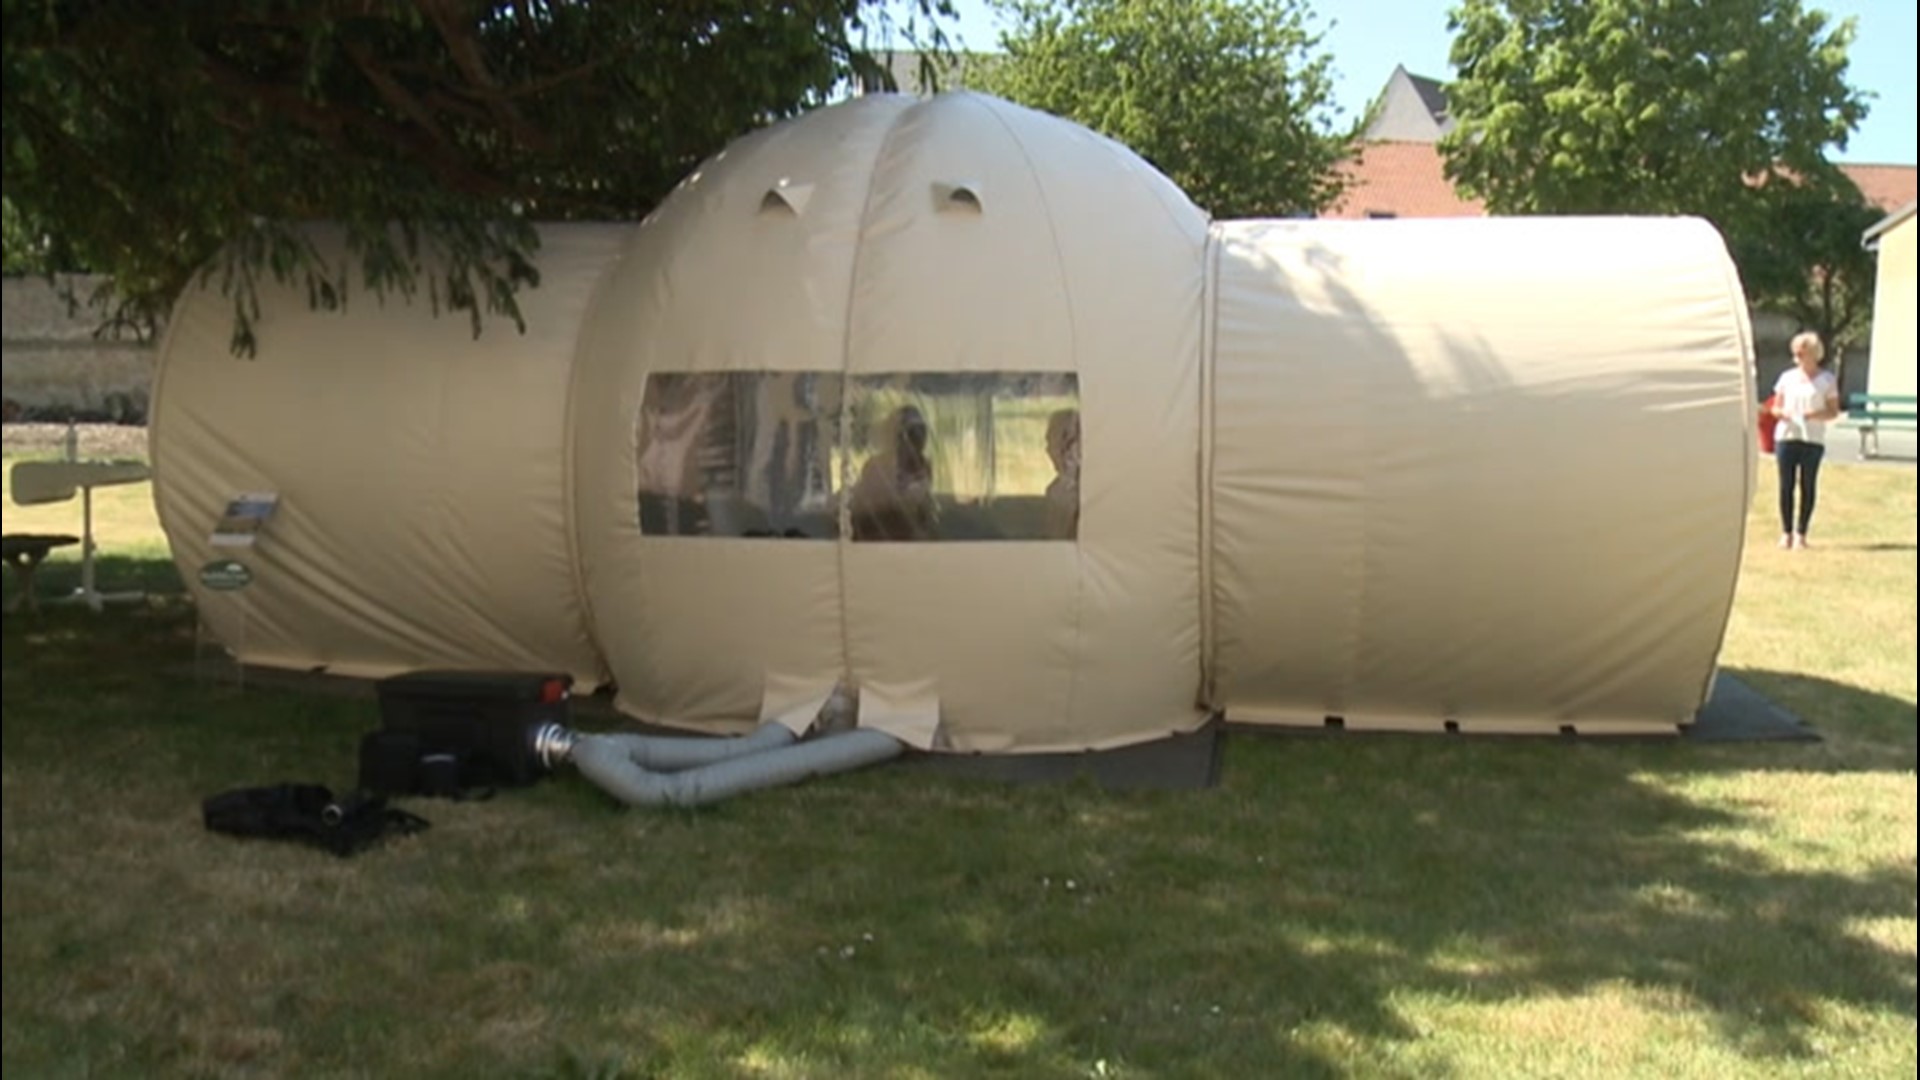 A nursing home in Bourbourg, France, sets up a 'bubble tent' to protect against COVID-19 during family visits on May 26. Talk about 'living in a bubble.'